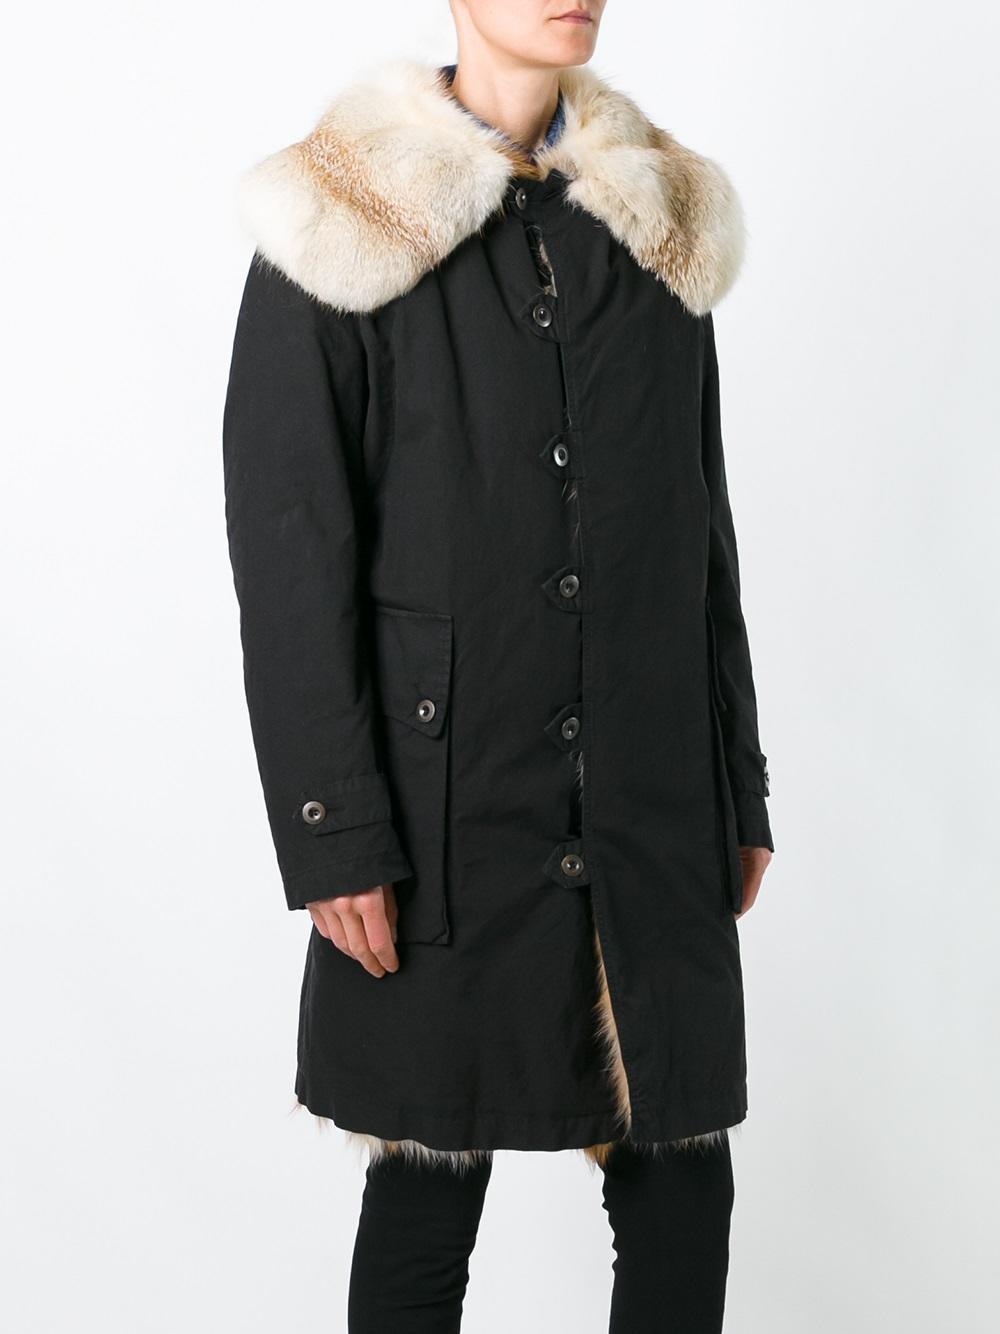 Mr & mrs italy Buttoned Mid Coat in Black | Lyst